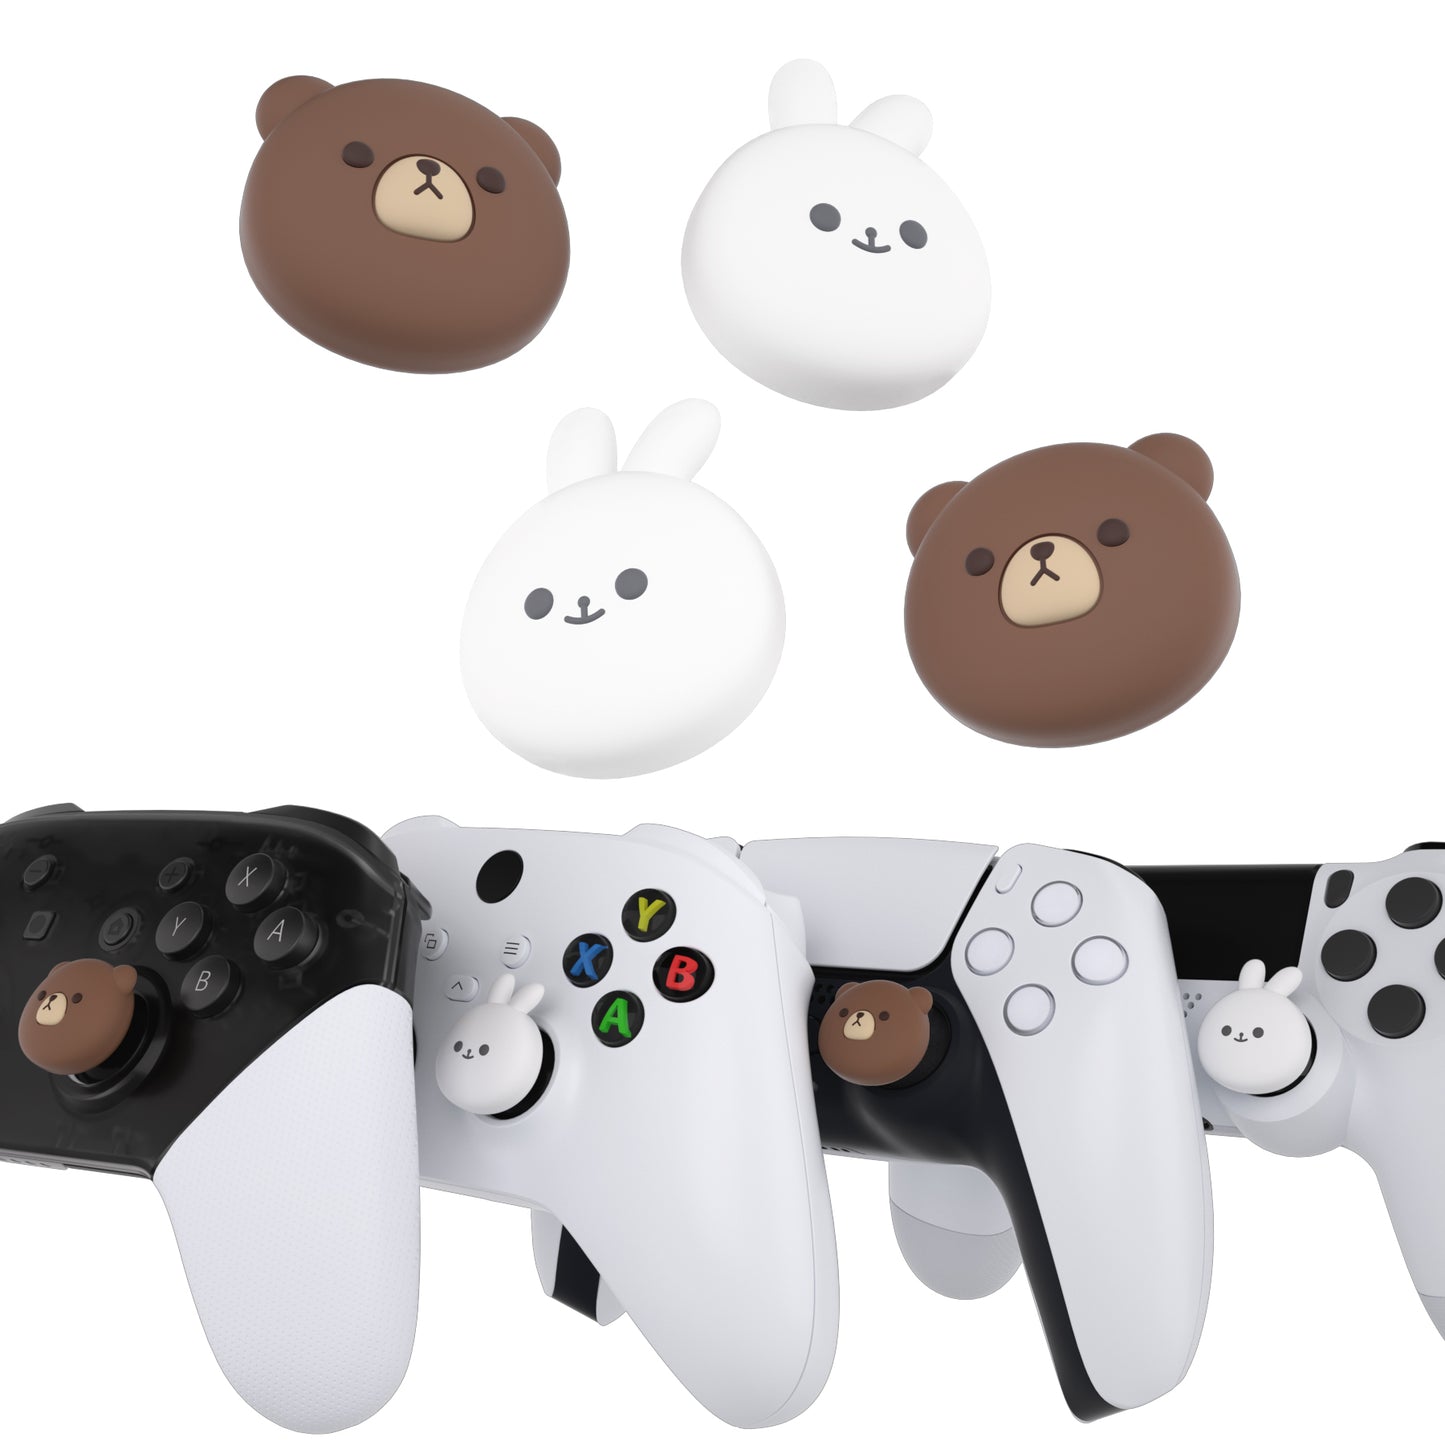 PlayVital Cute Thumb Grip Caps for ps5/4 Controller, Silicone Analog Stick Caps Cover for Xbox Series X/S, Thumbstick Caps for Switch Pro Controller - Chubby Bear & Smiley Bunny - PJM3029 PlayVital